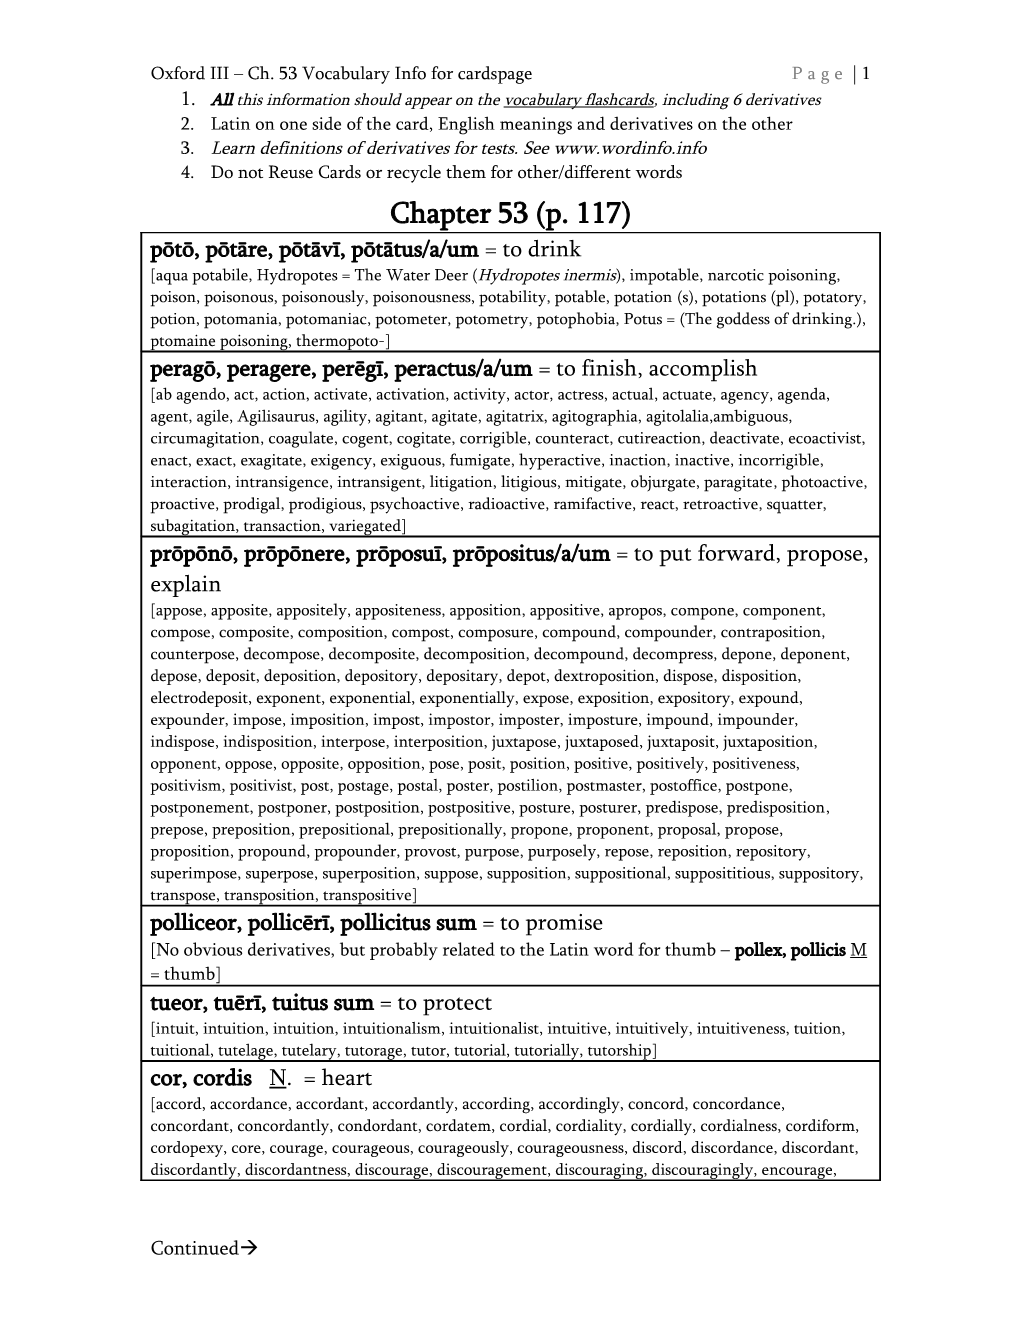 Oxford III Ch. 53 Vocabulary Info for Cards Page Page 2